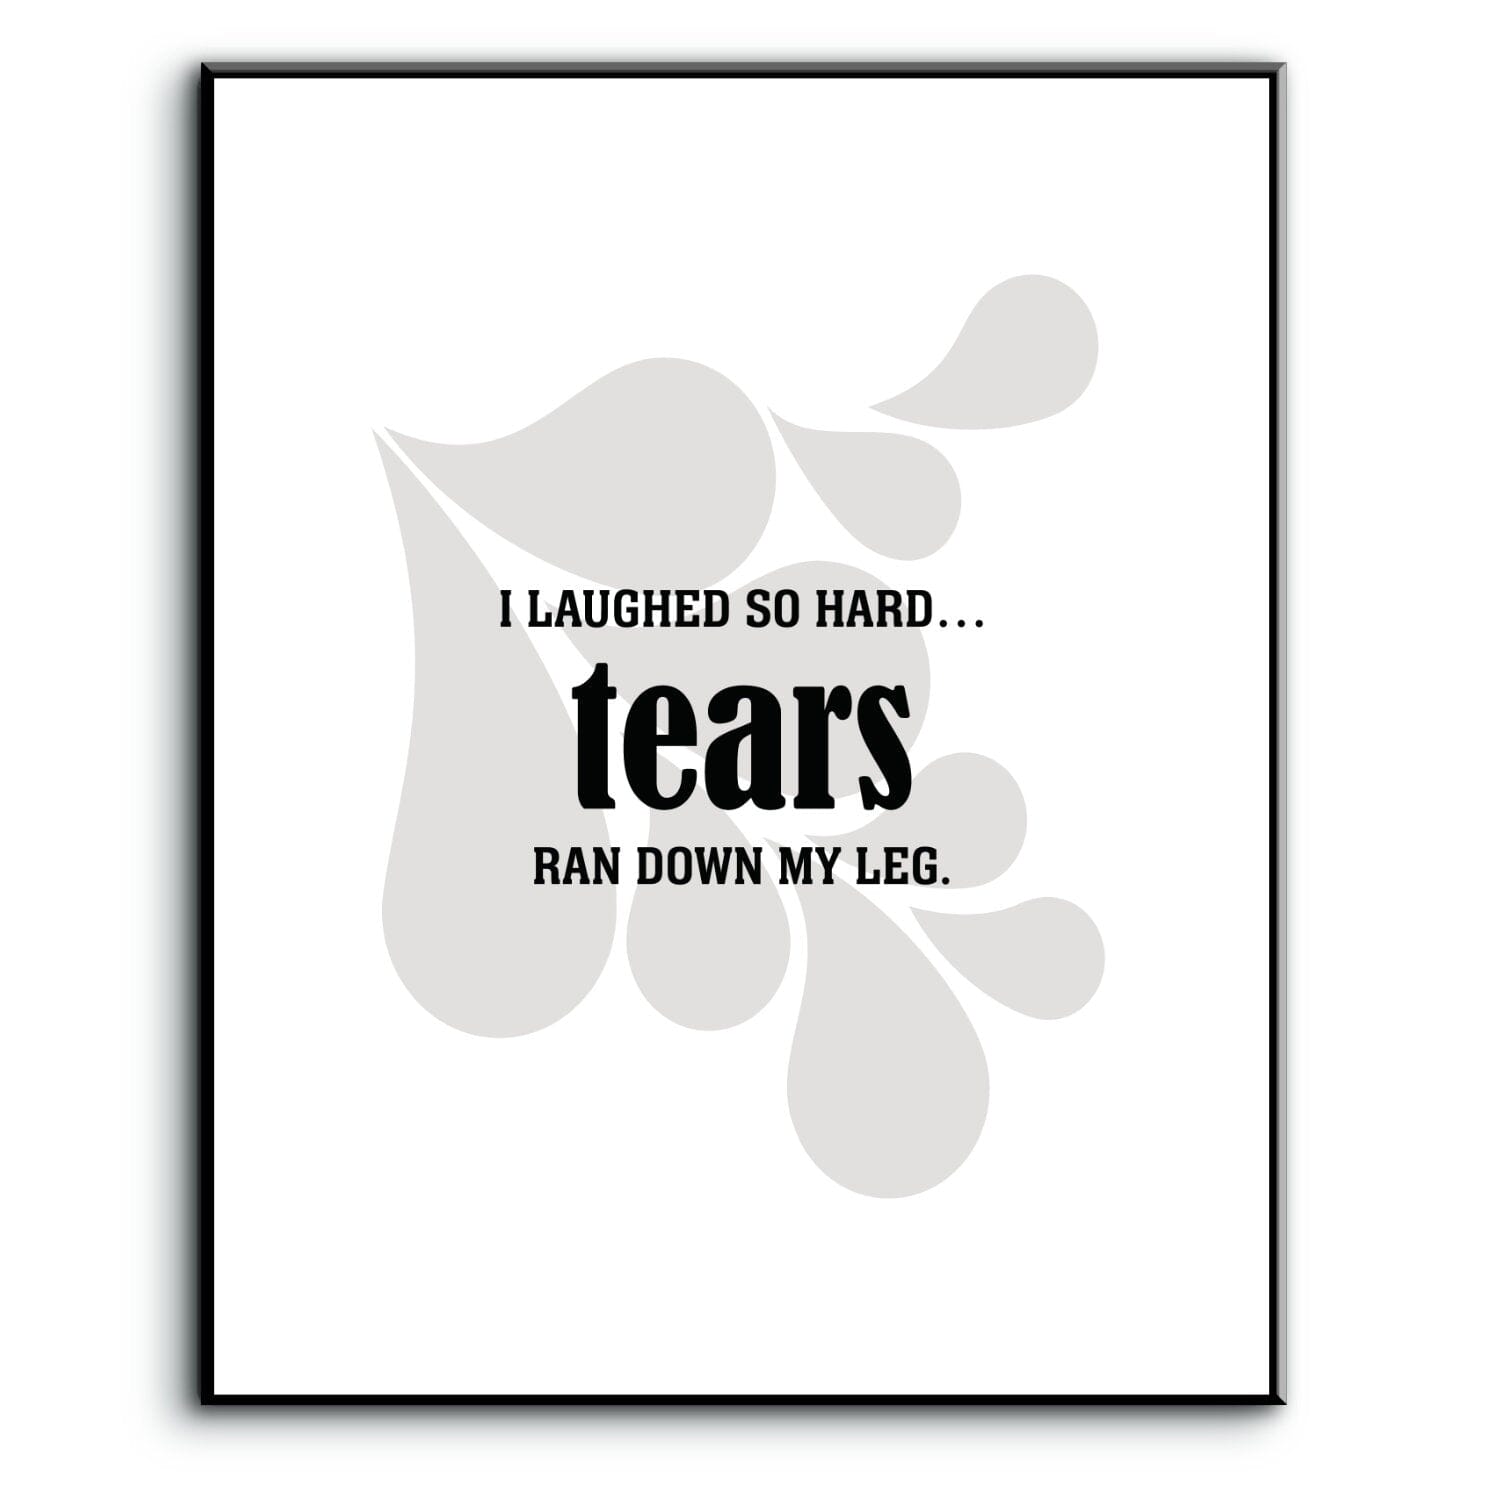 Wise and Witty Art - I Laughed So Hard Tears Ran Down My Leg Wise and Wiseass Quotes Song Lyrics Art 8x10 Plaque Mount 